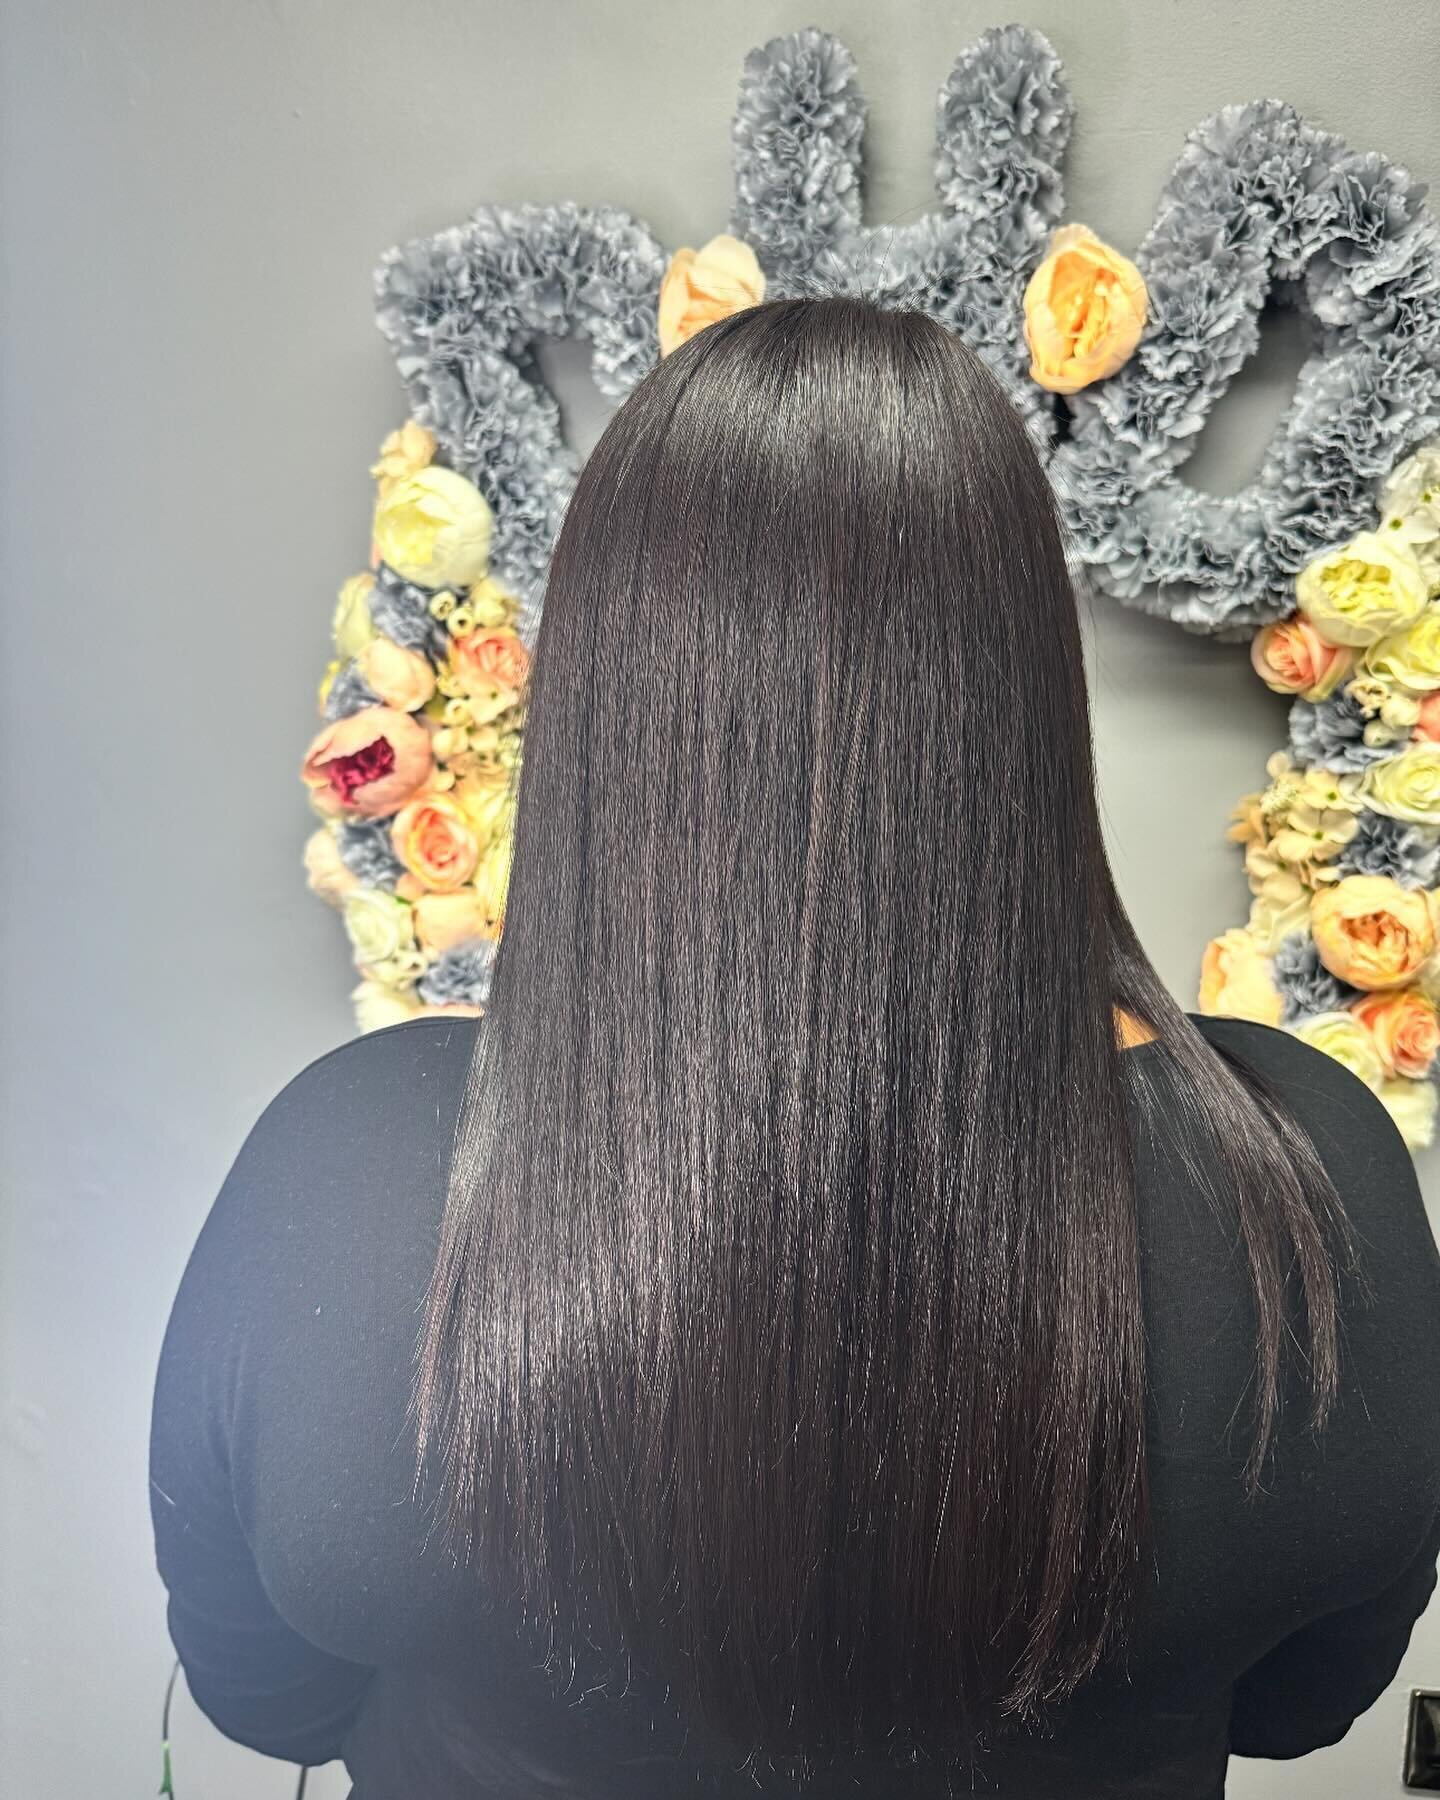 Lamination treatment 😍
&bull;
Less intense version of a keratin treatment that lasts up to a month 🤩